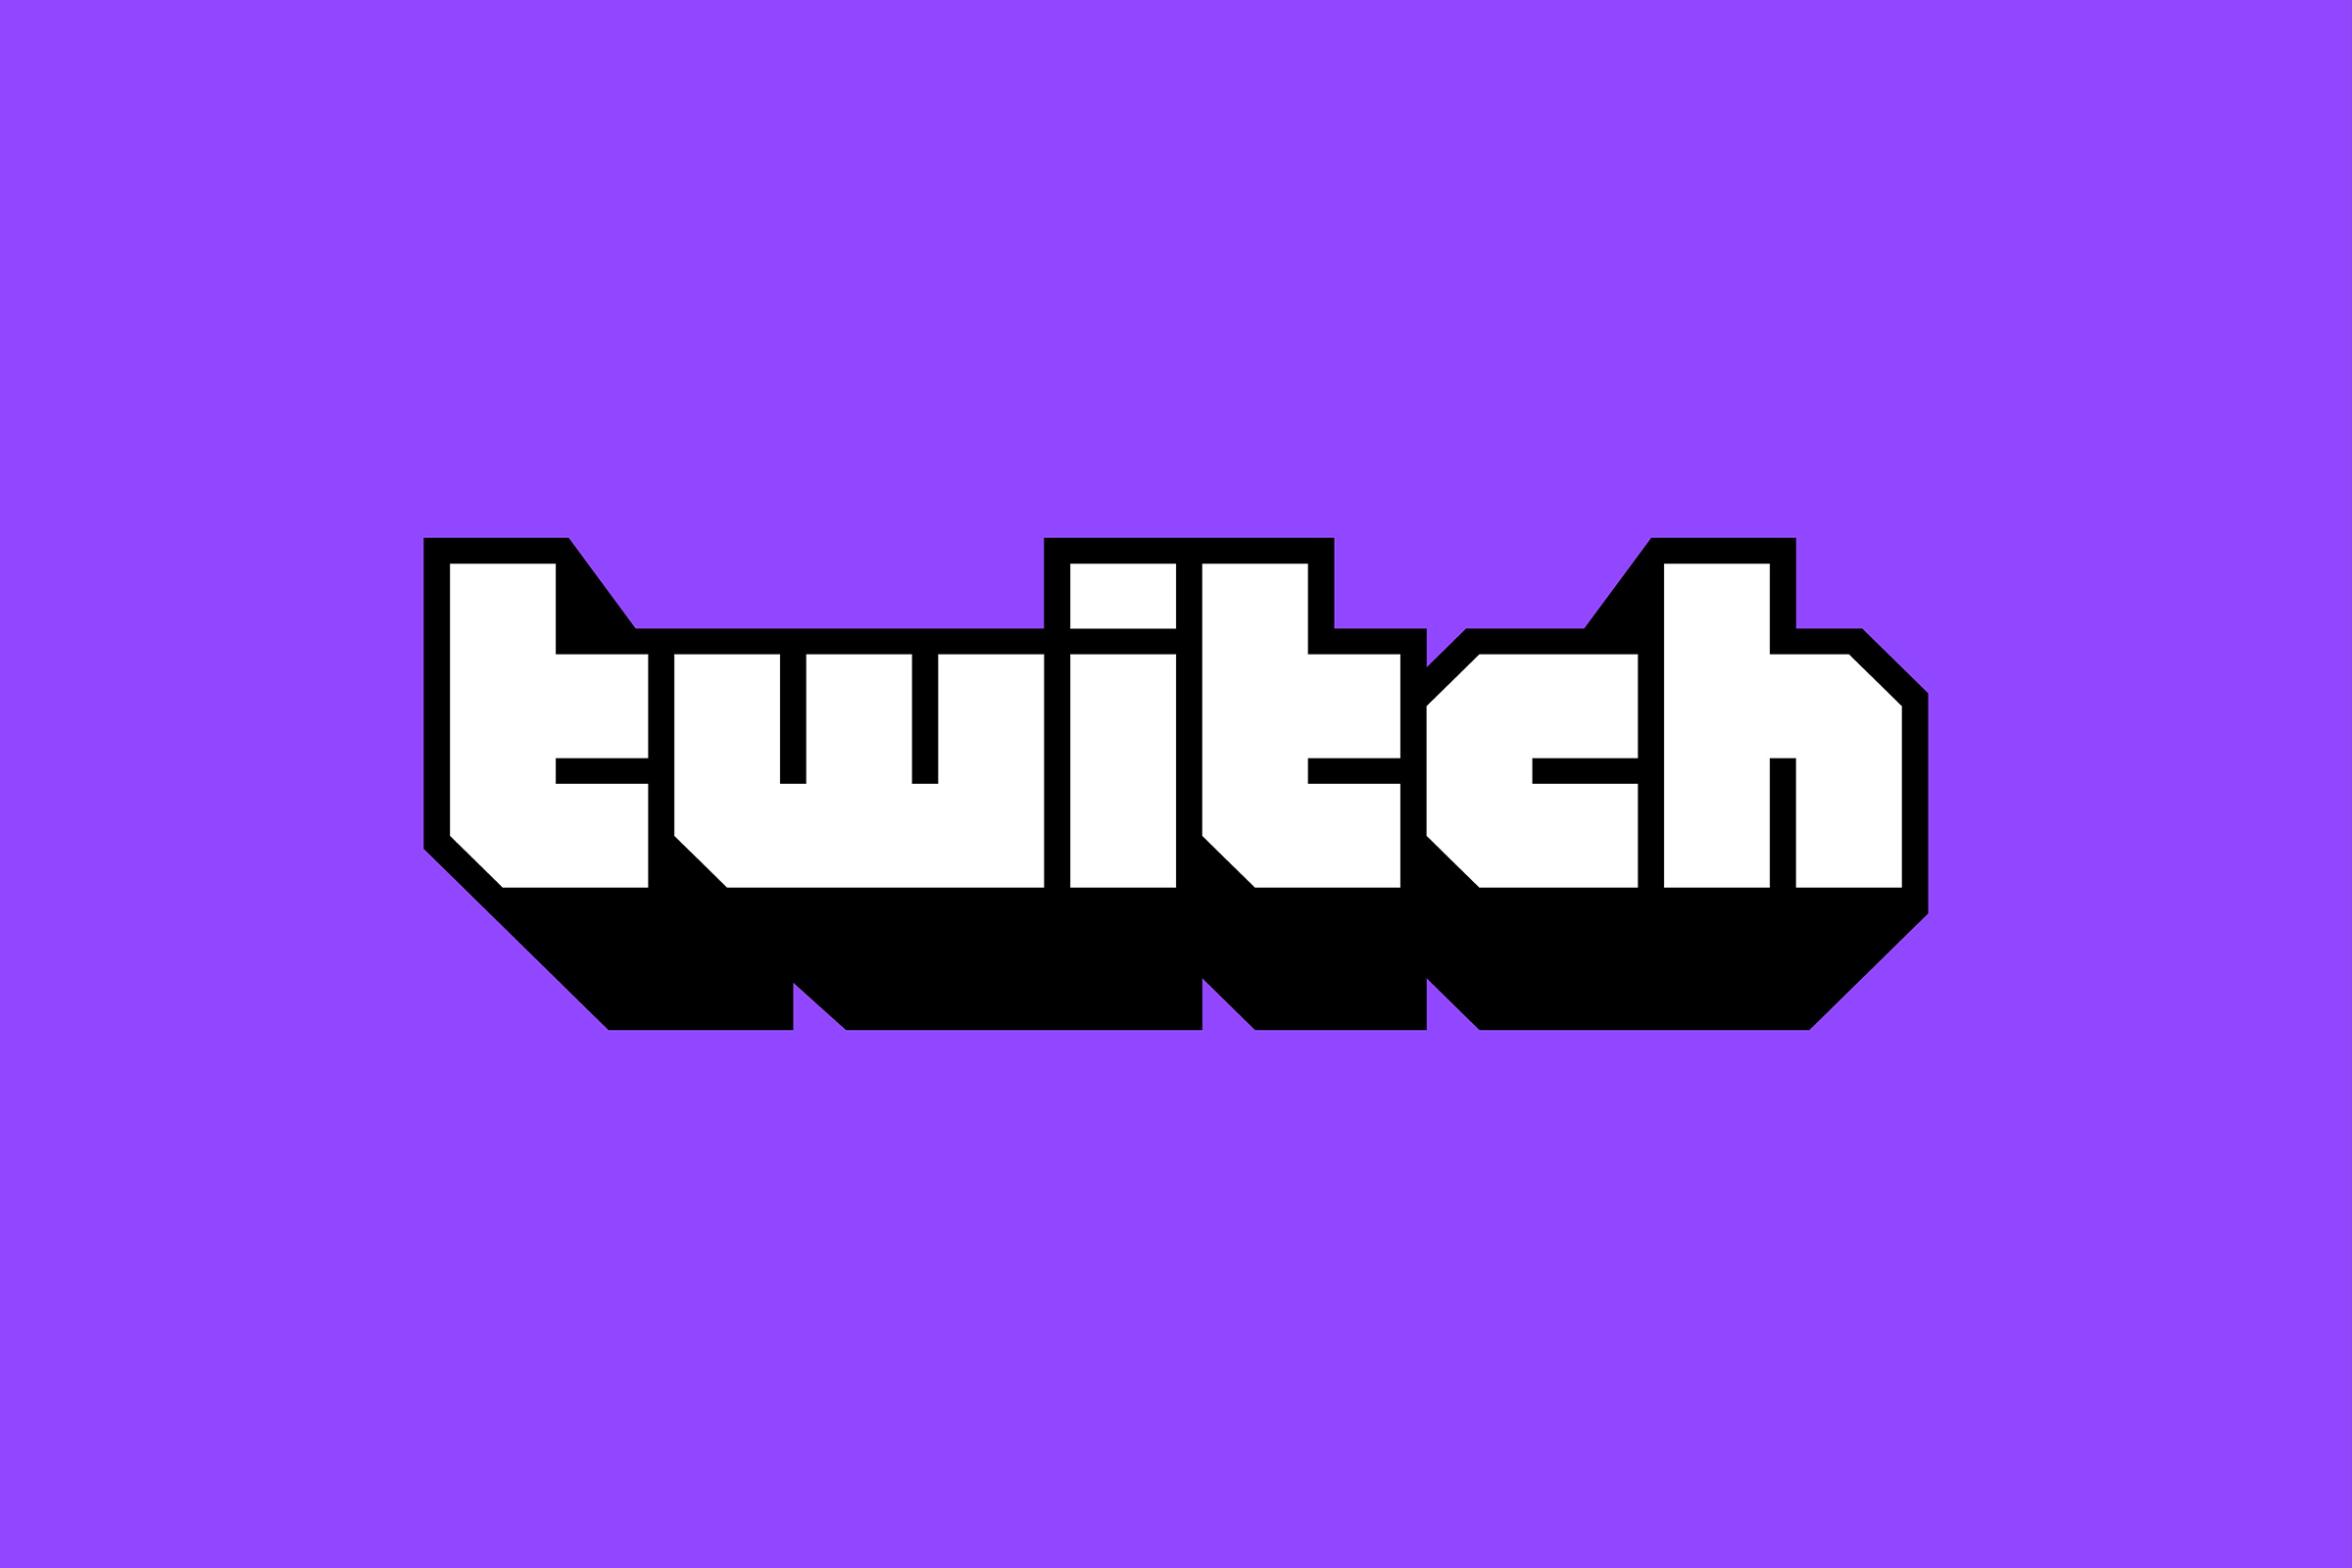 Official Twitch App for Apple TV Now Available - MacRumors